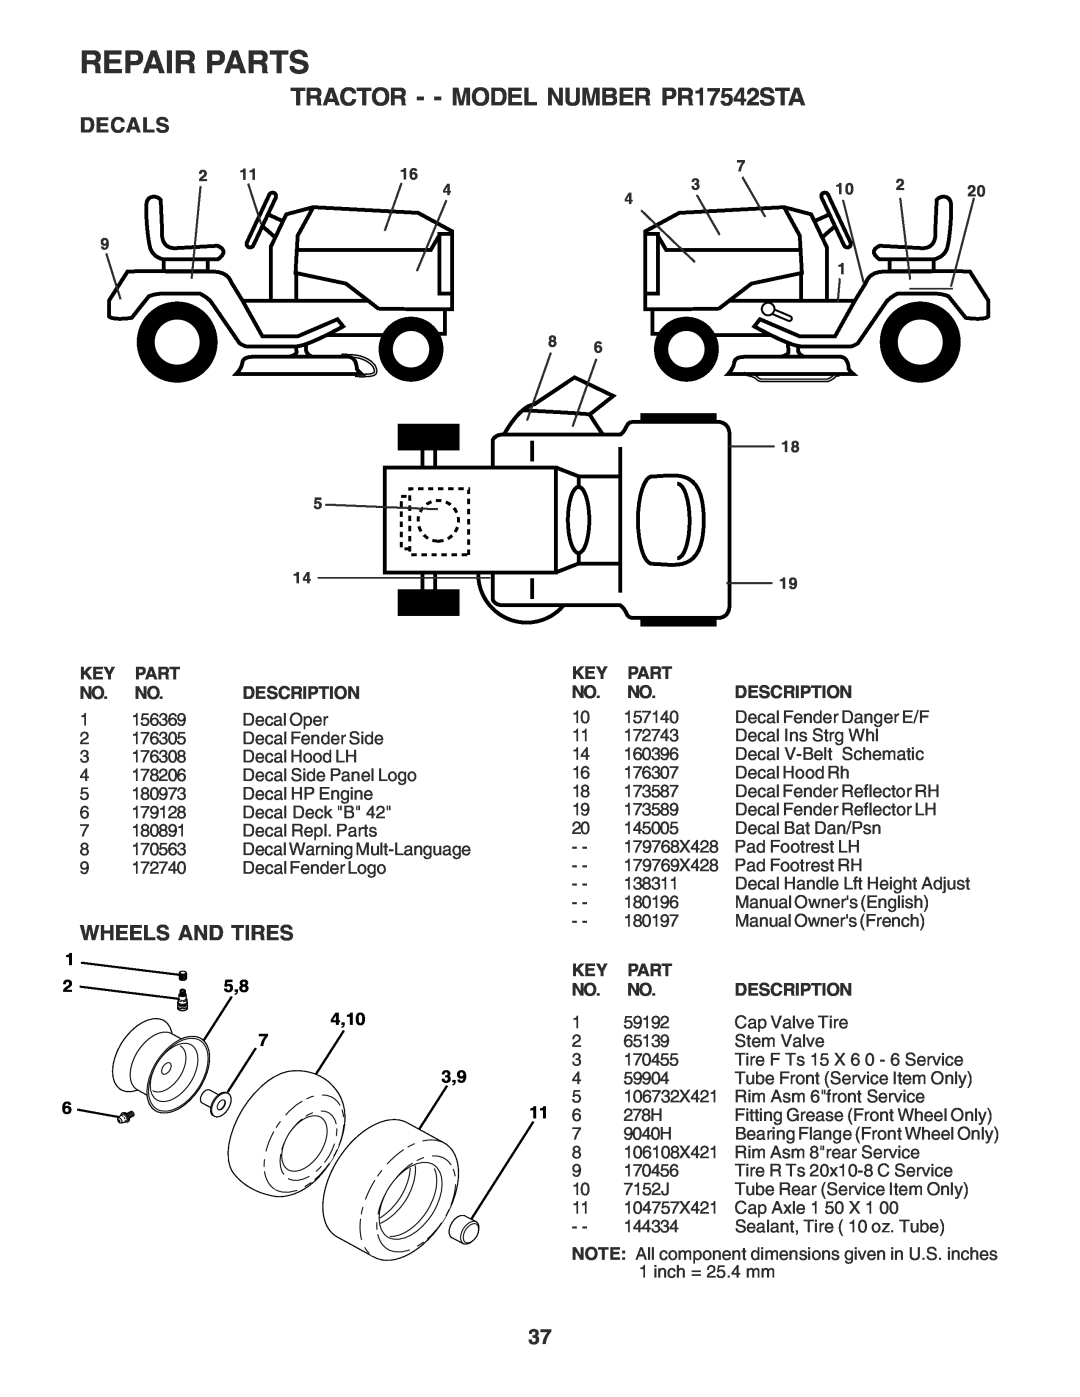 Poulan owner manual Decals, Wheels And Tires, Repair Parts, TRACTOR - - MODEL NUMBER PR17542STA, Description, 4,10 